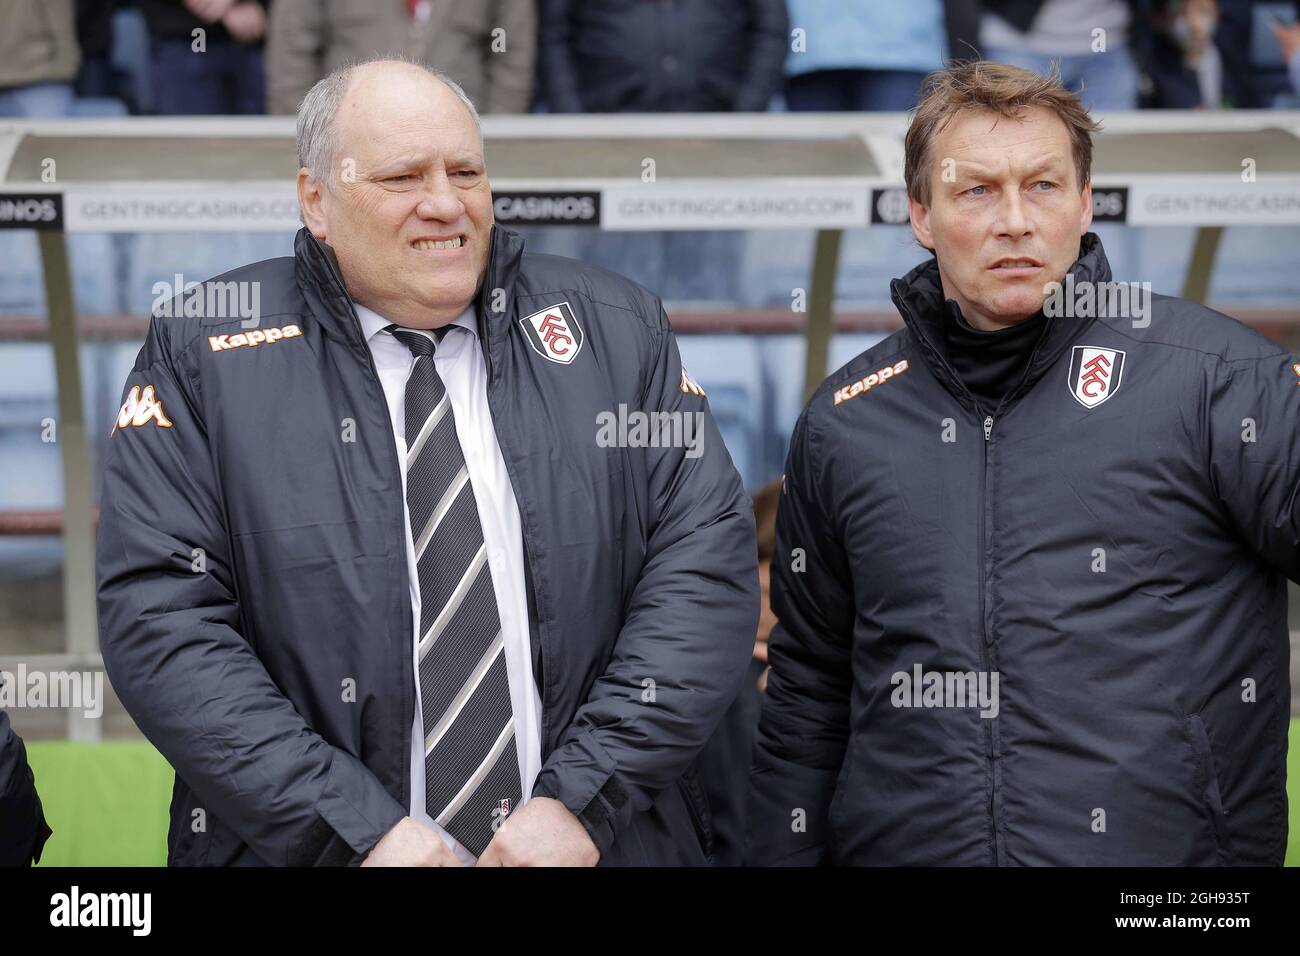 Fulham manager Martin Jol (left) and head coach Michael Lindeman seen  during the Barclays Premier League match between Aston Villa and Fulham  held at Villa Park in Birmingham, UK on April 13,